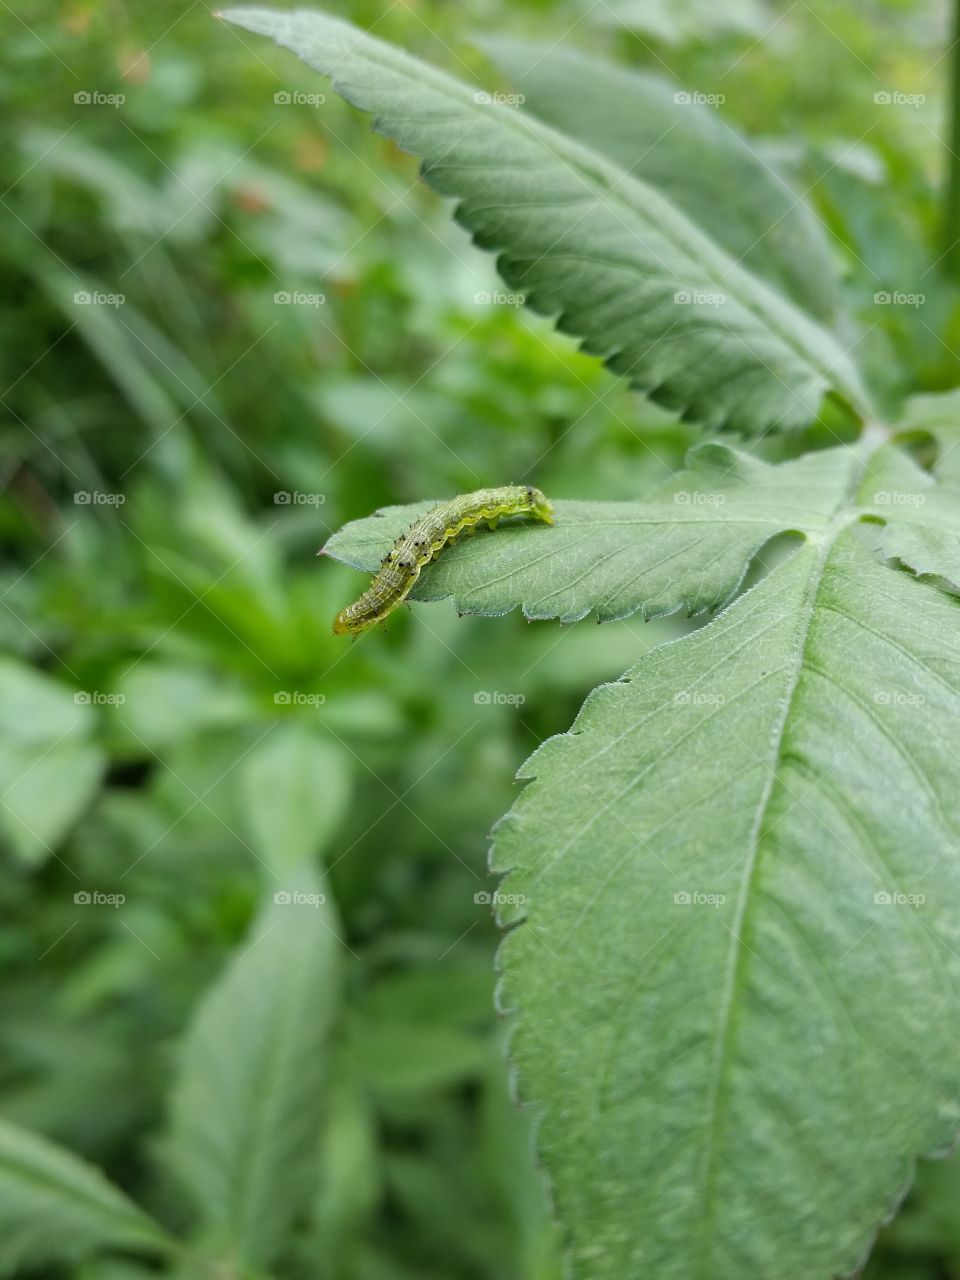 The green caterpillar which seems to fall from the leaf